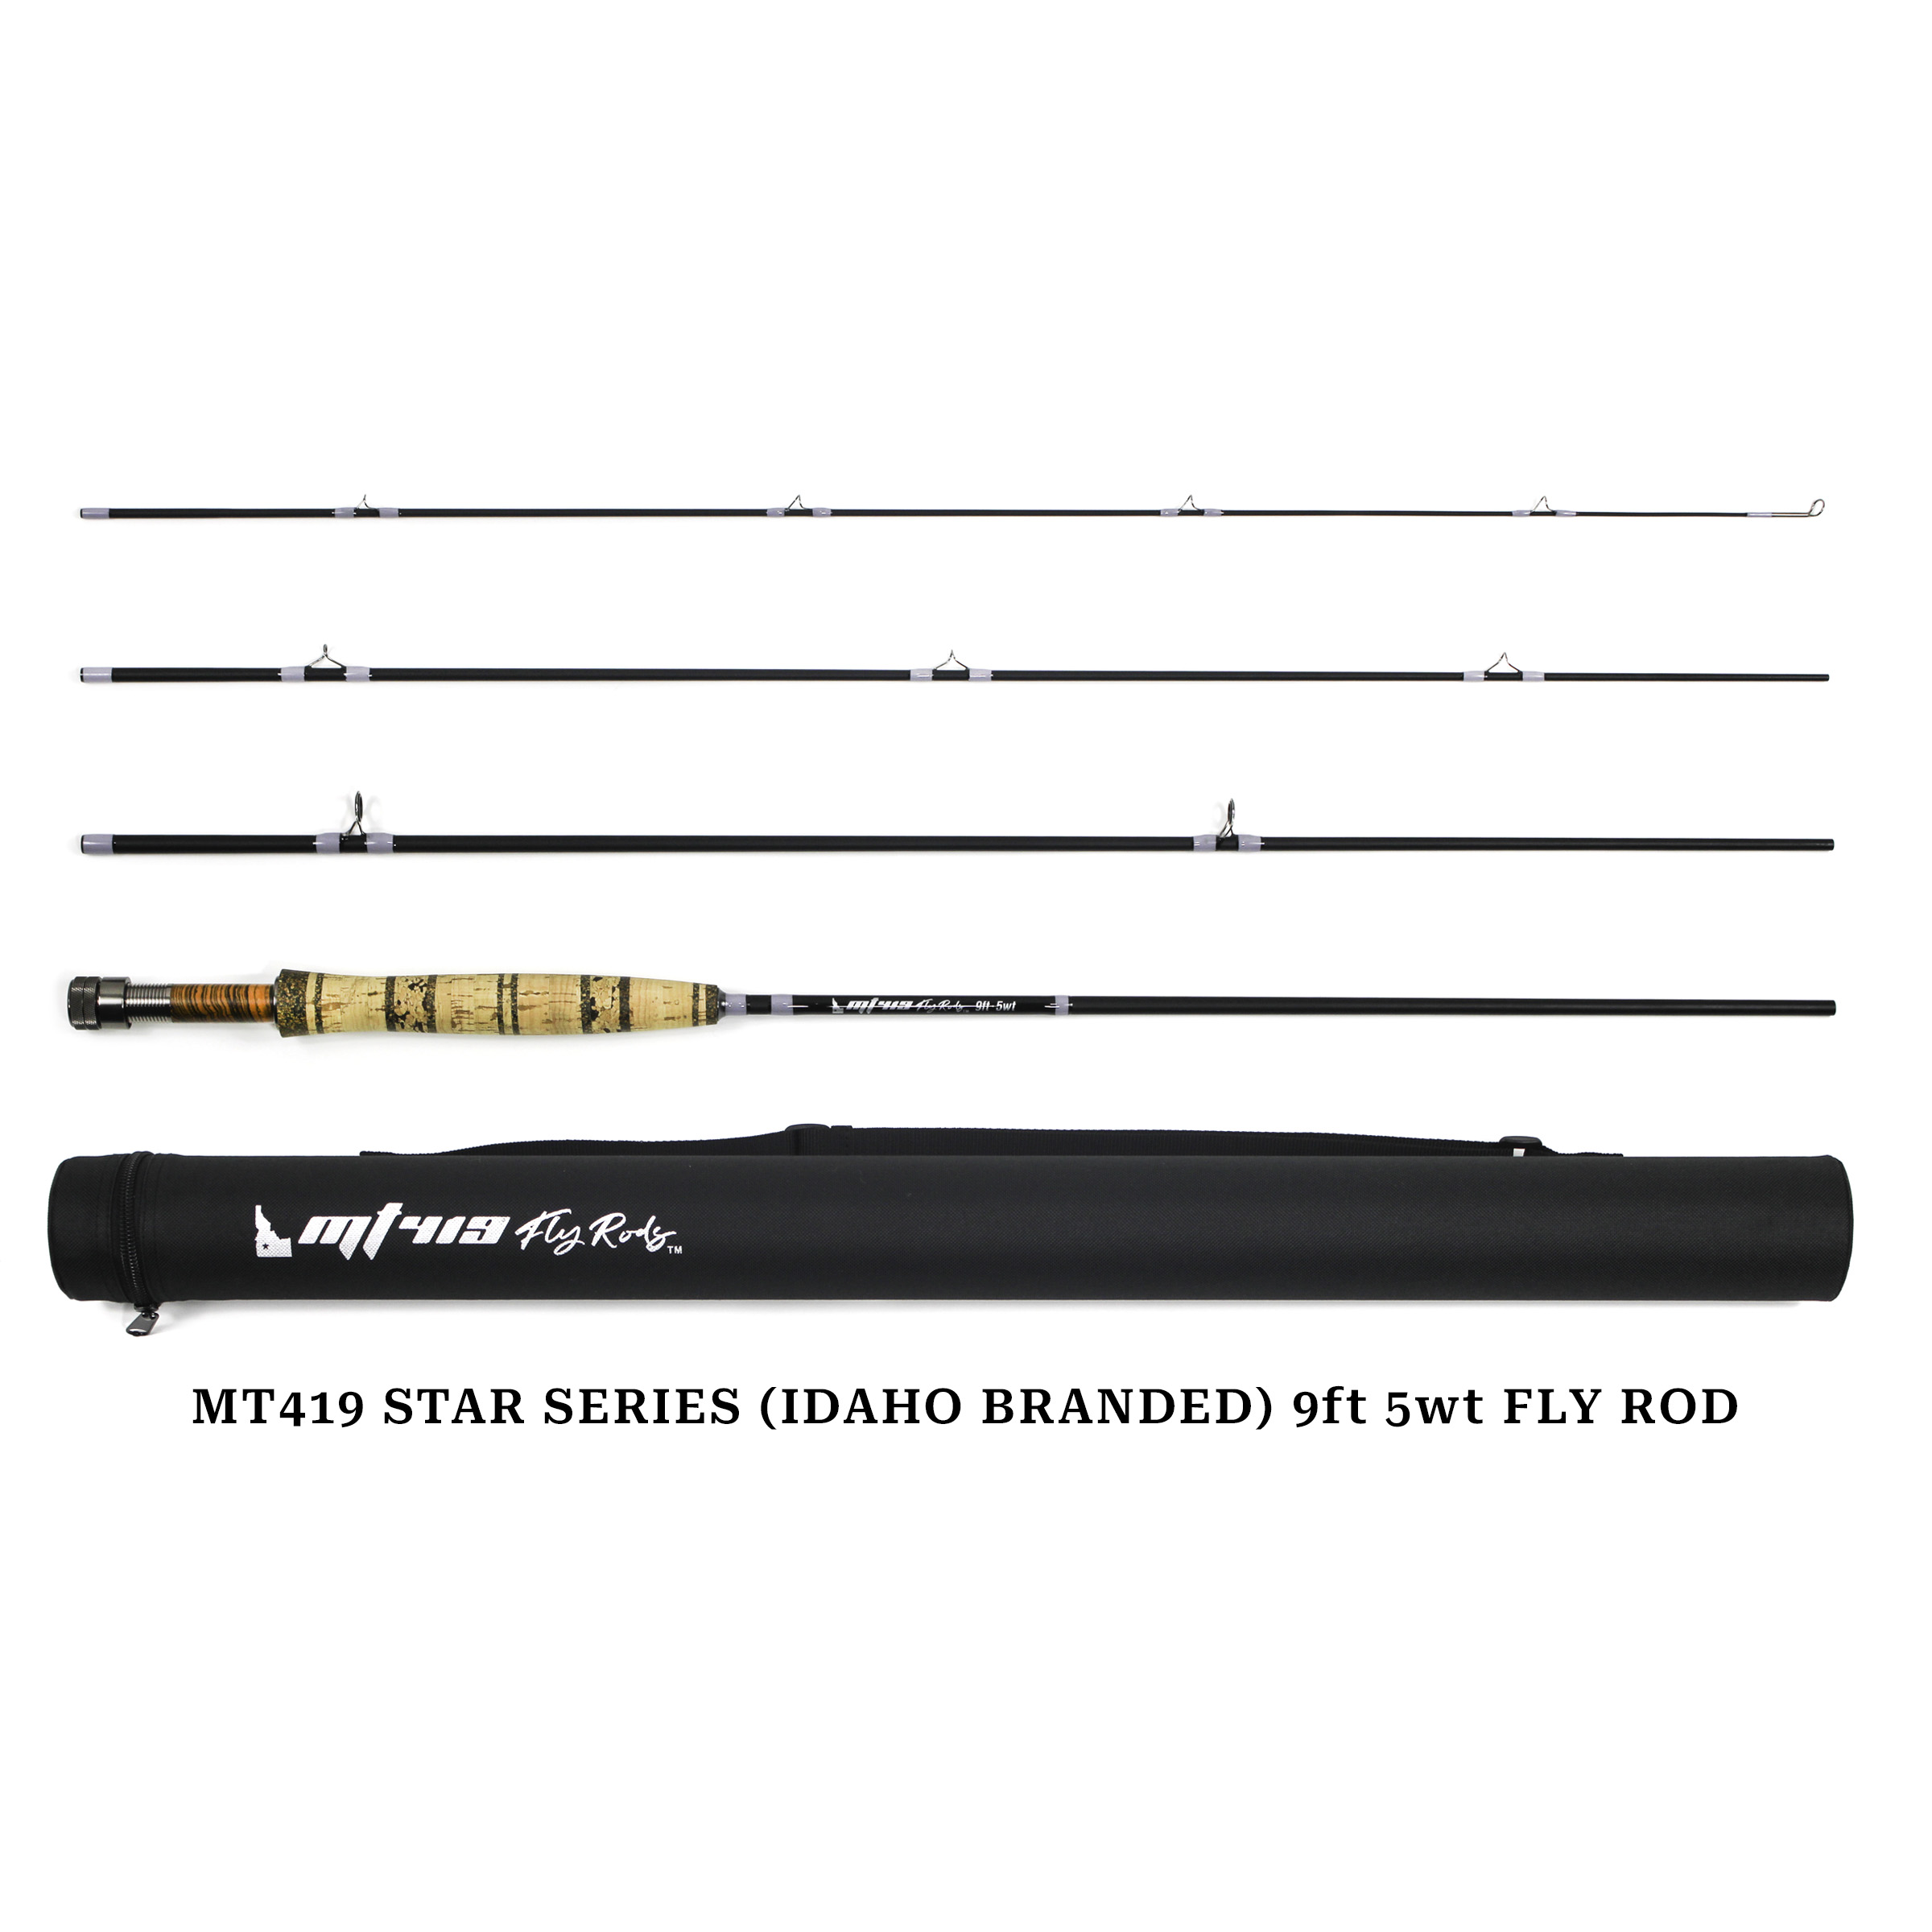 Star Series - MT419 FLY RODS